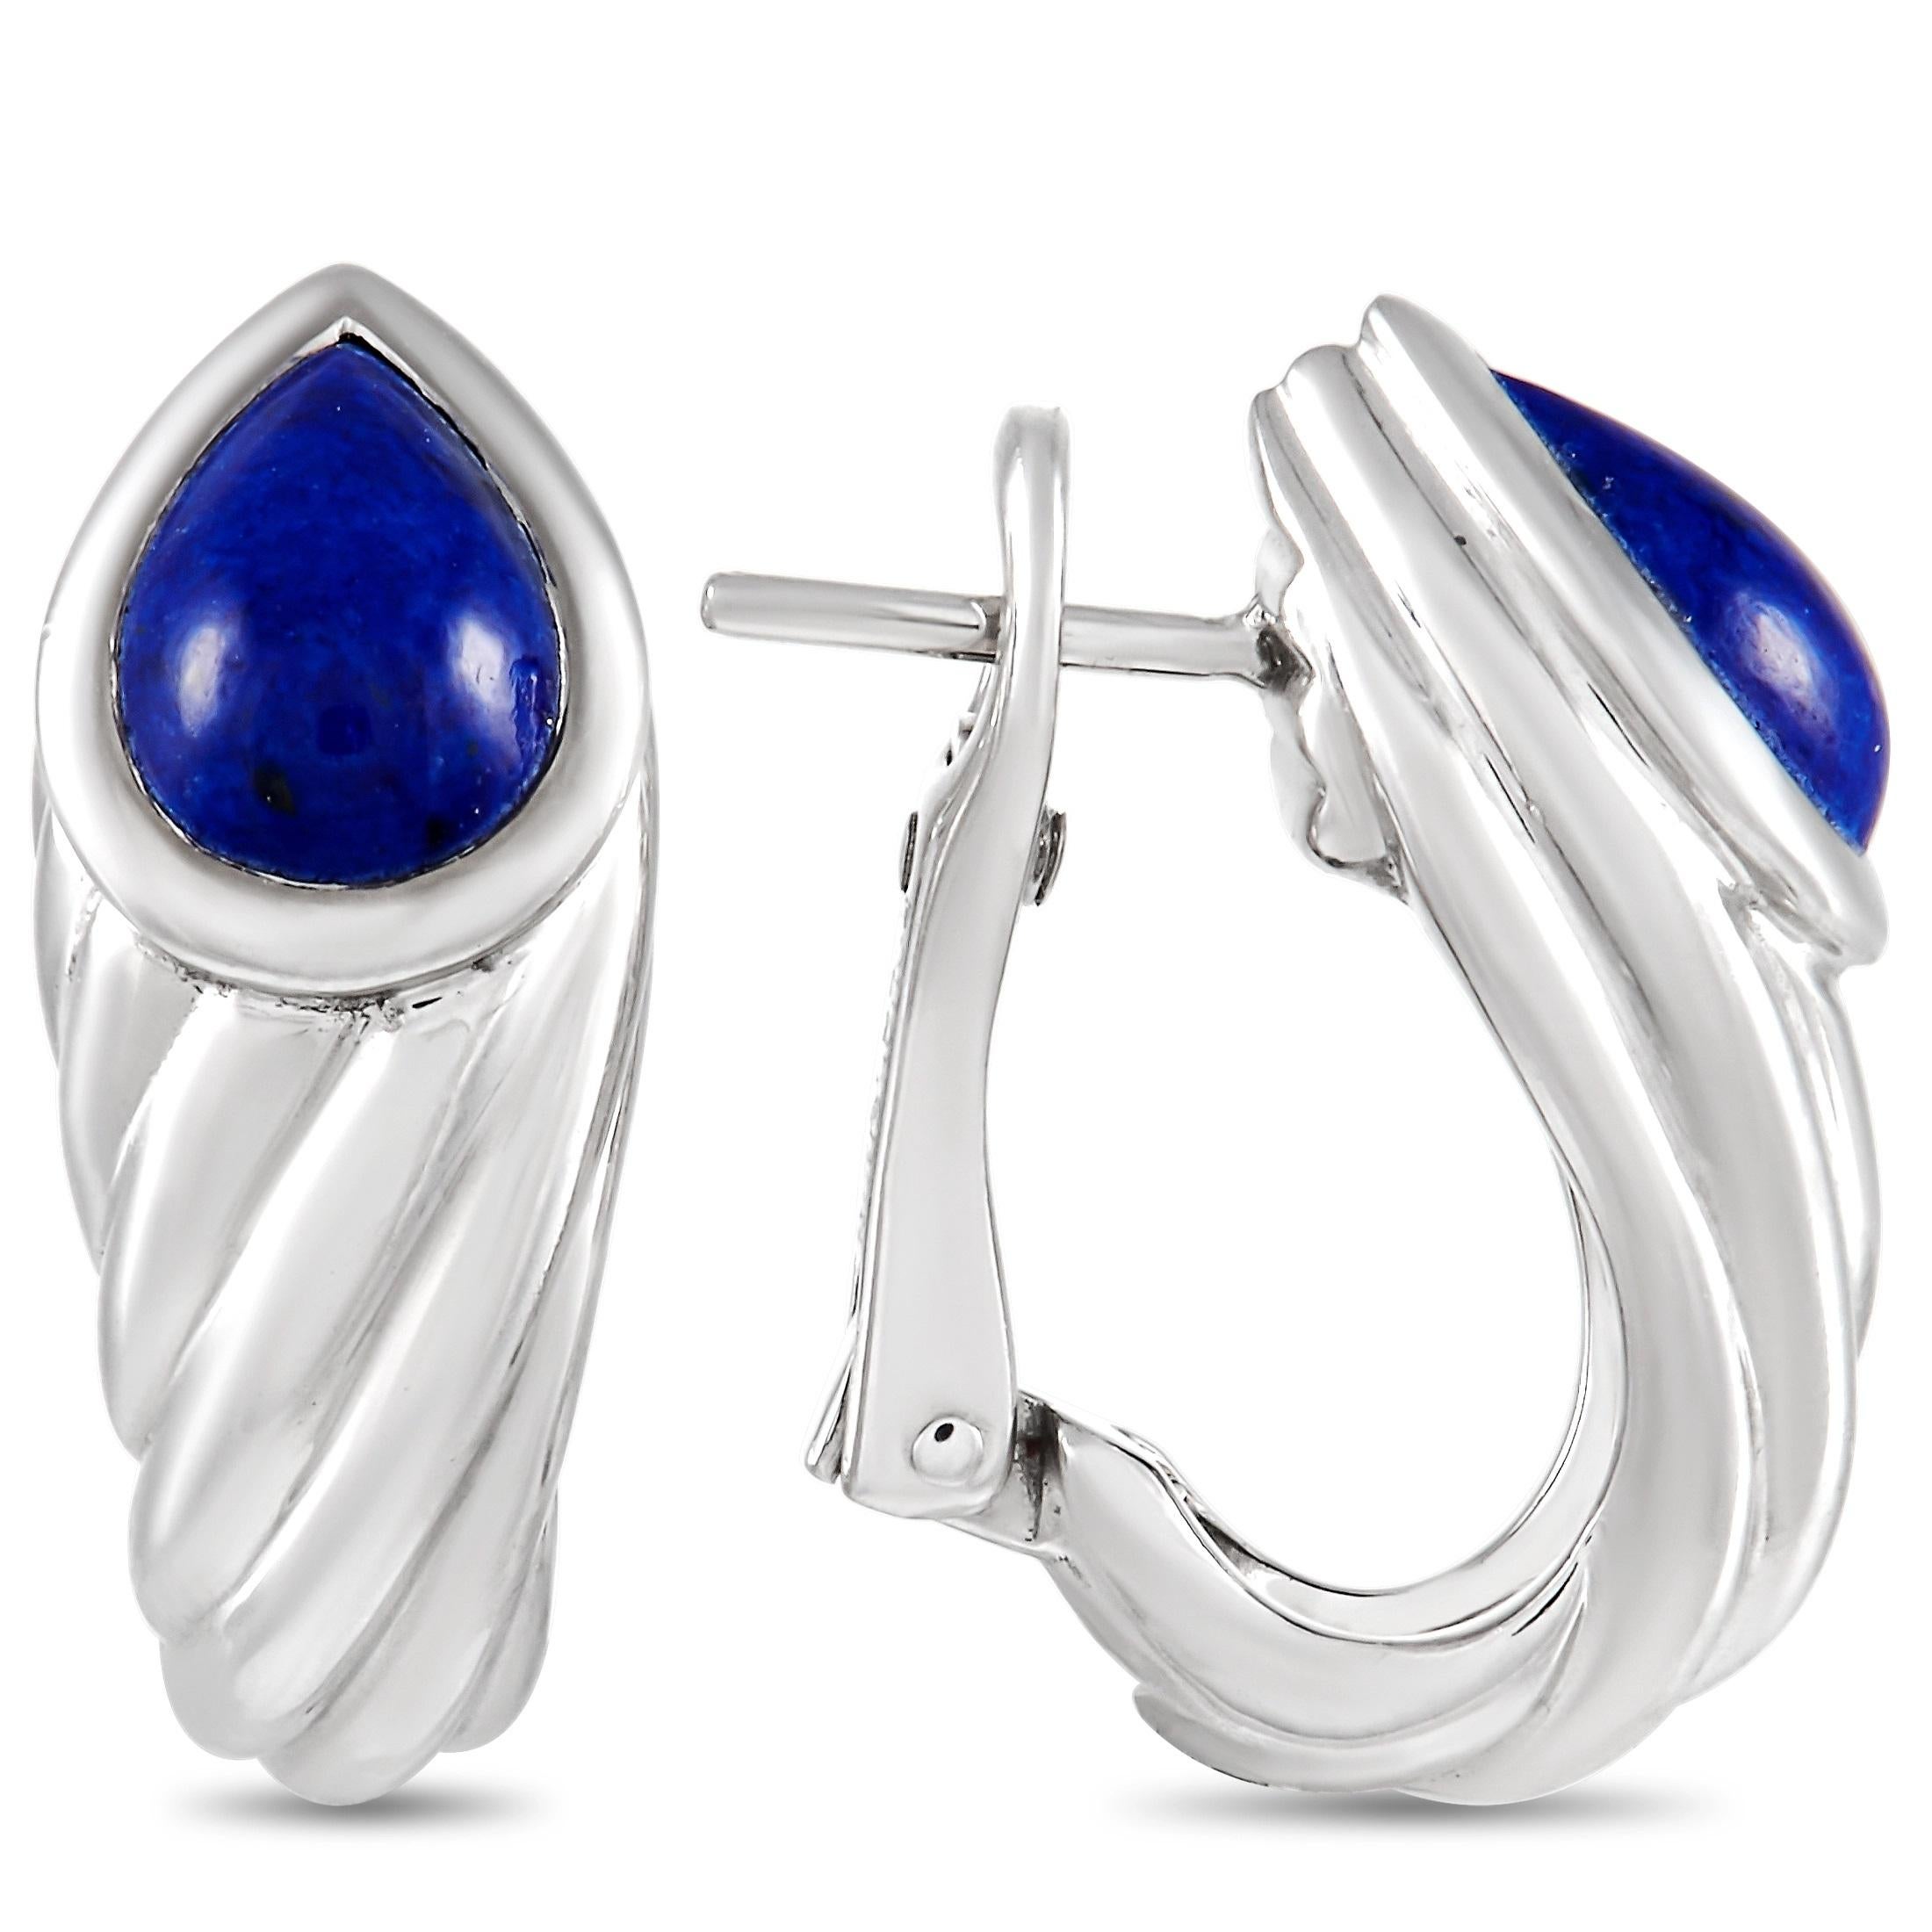 Designed by the first contemporary jeweler to open a boutique on Place Vendôme in Paris, this pair of lapis lazuli huggie earrings will be a treasured addition to your jewelry collection. The Boucheron 18K White Gold Lapis Lazuli Huggie Earrings